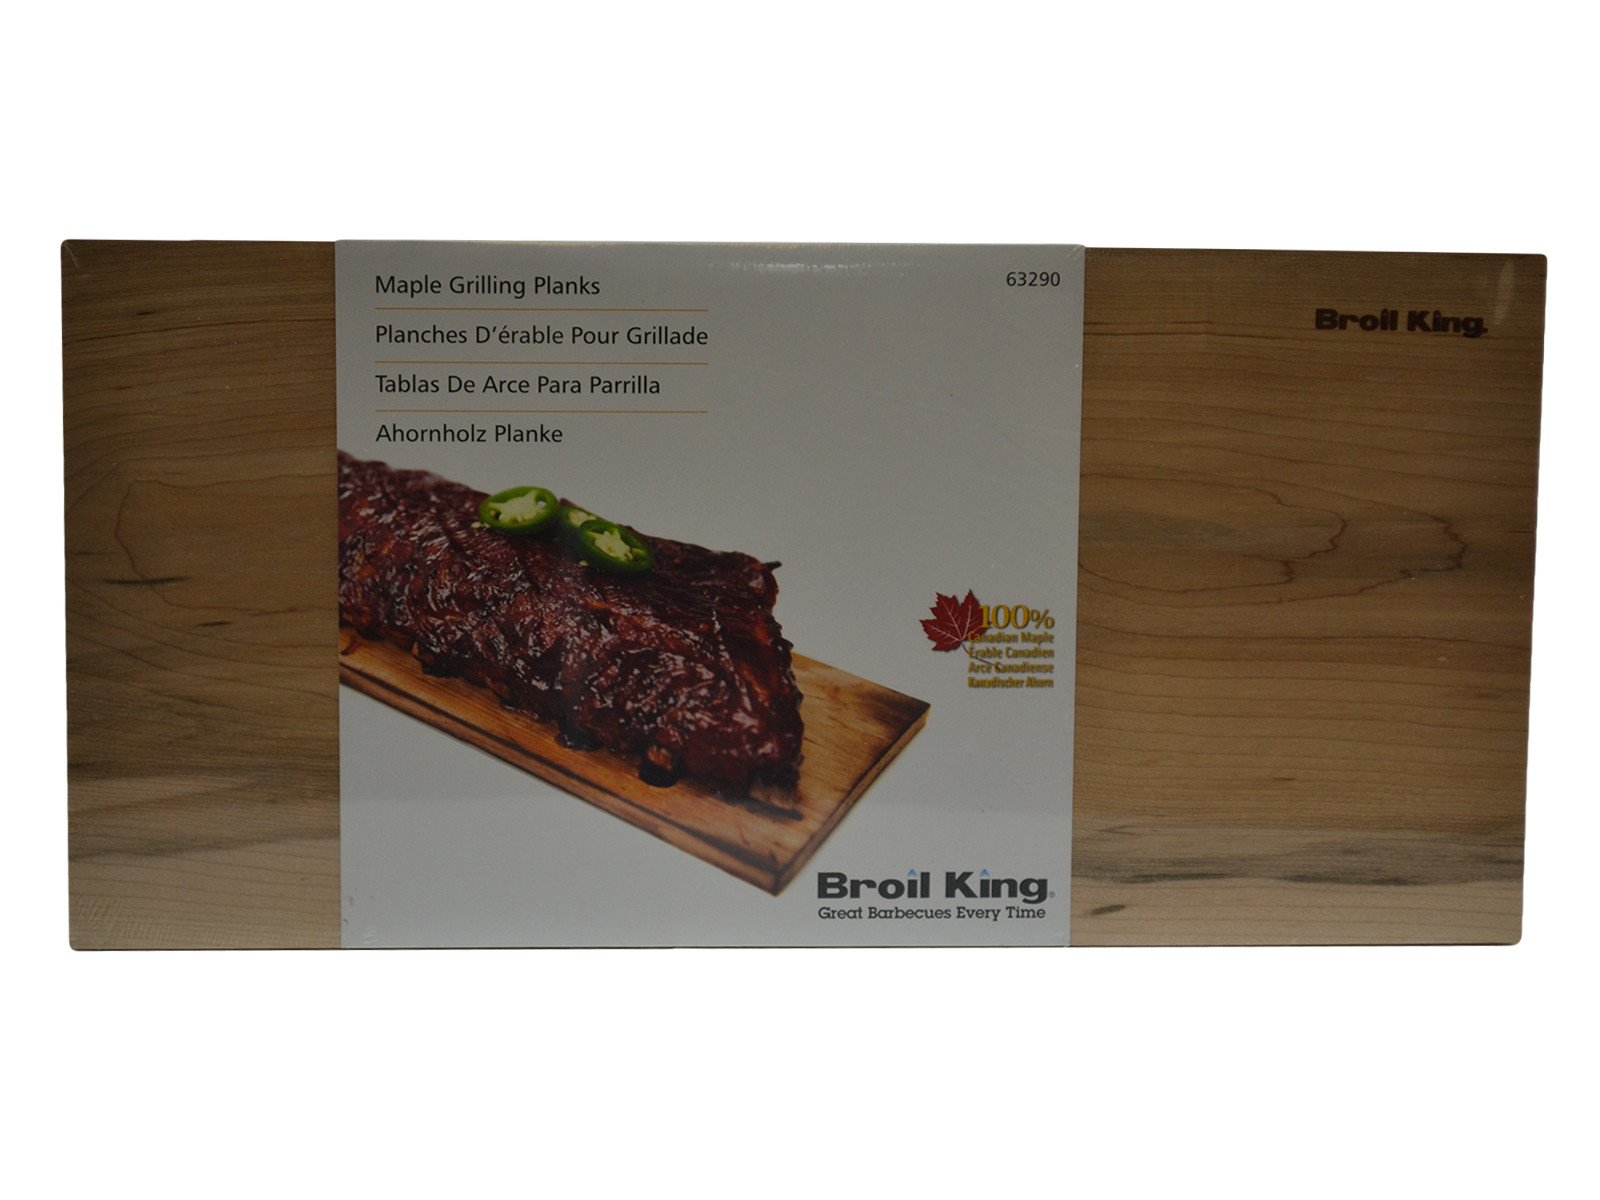 Broil King: Maple Grilling Planks